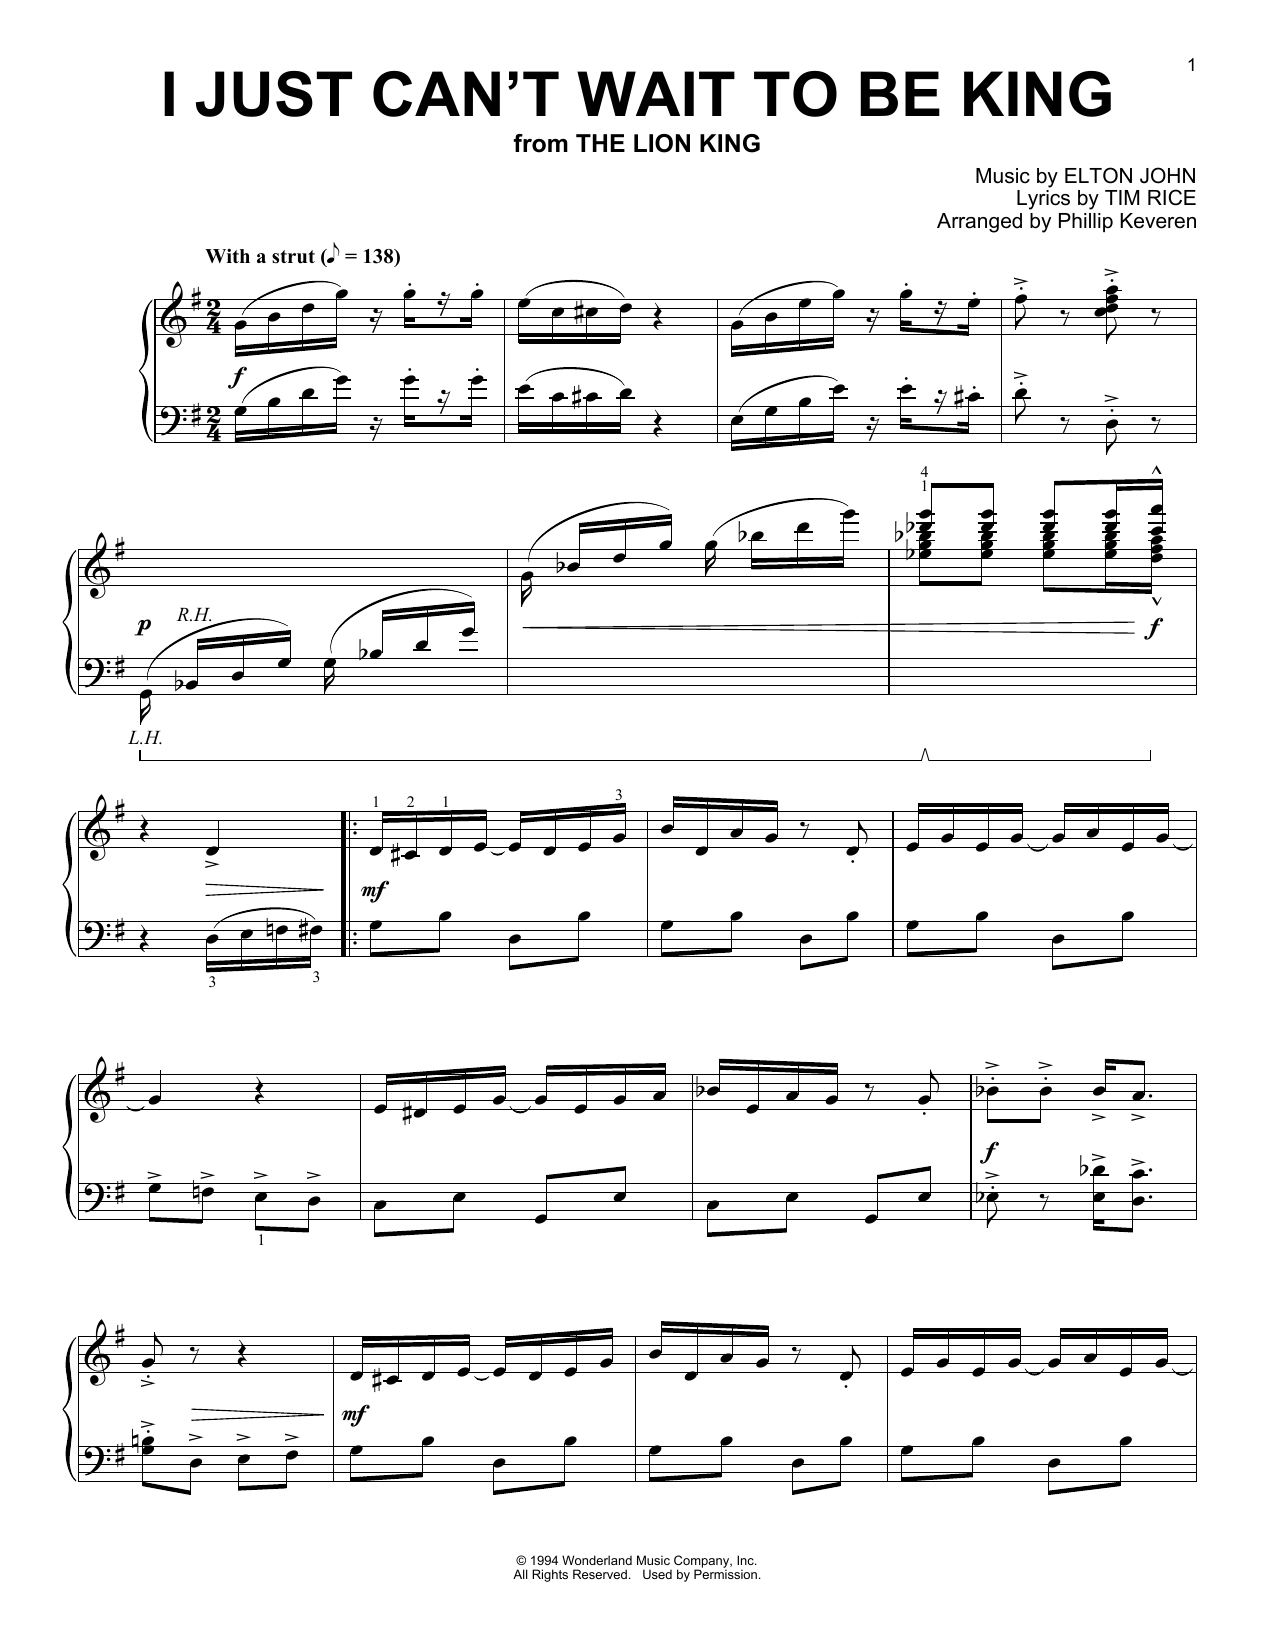 I Just Can't Wait To Be King [Ragtime version] (from The Lion King) (arr. Phillip Keveren) sheet music